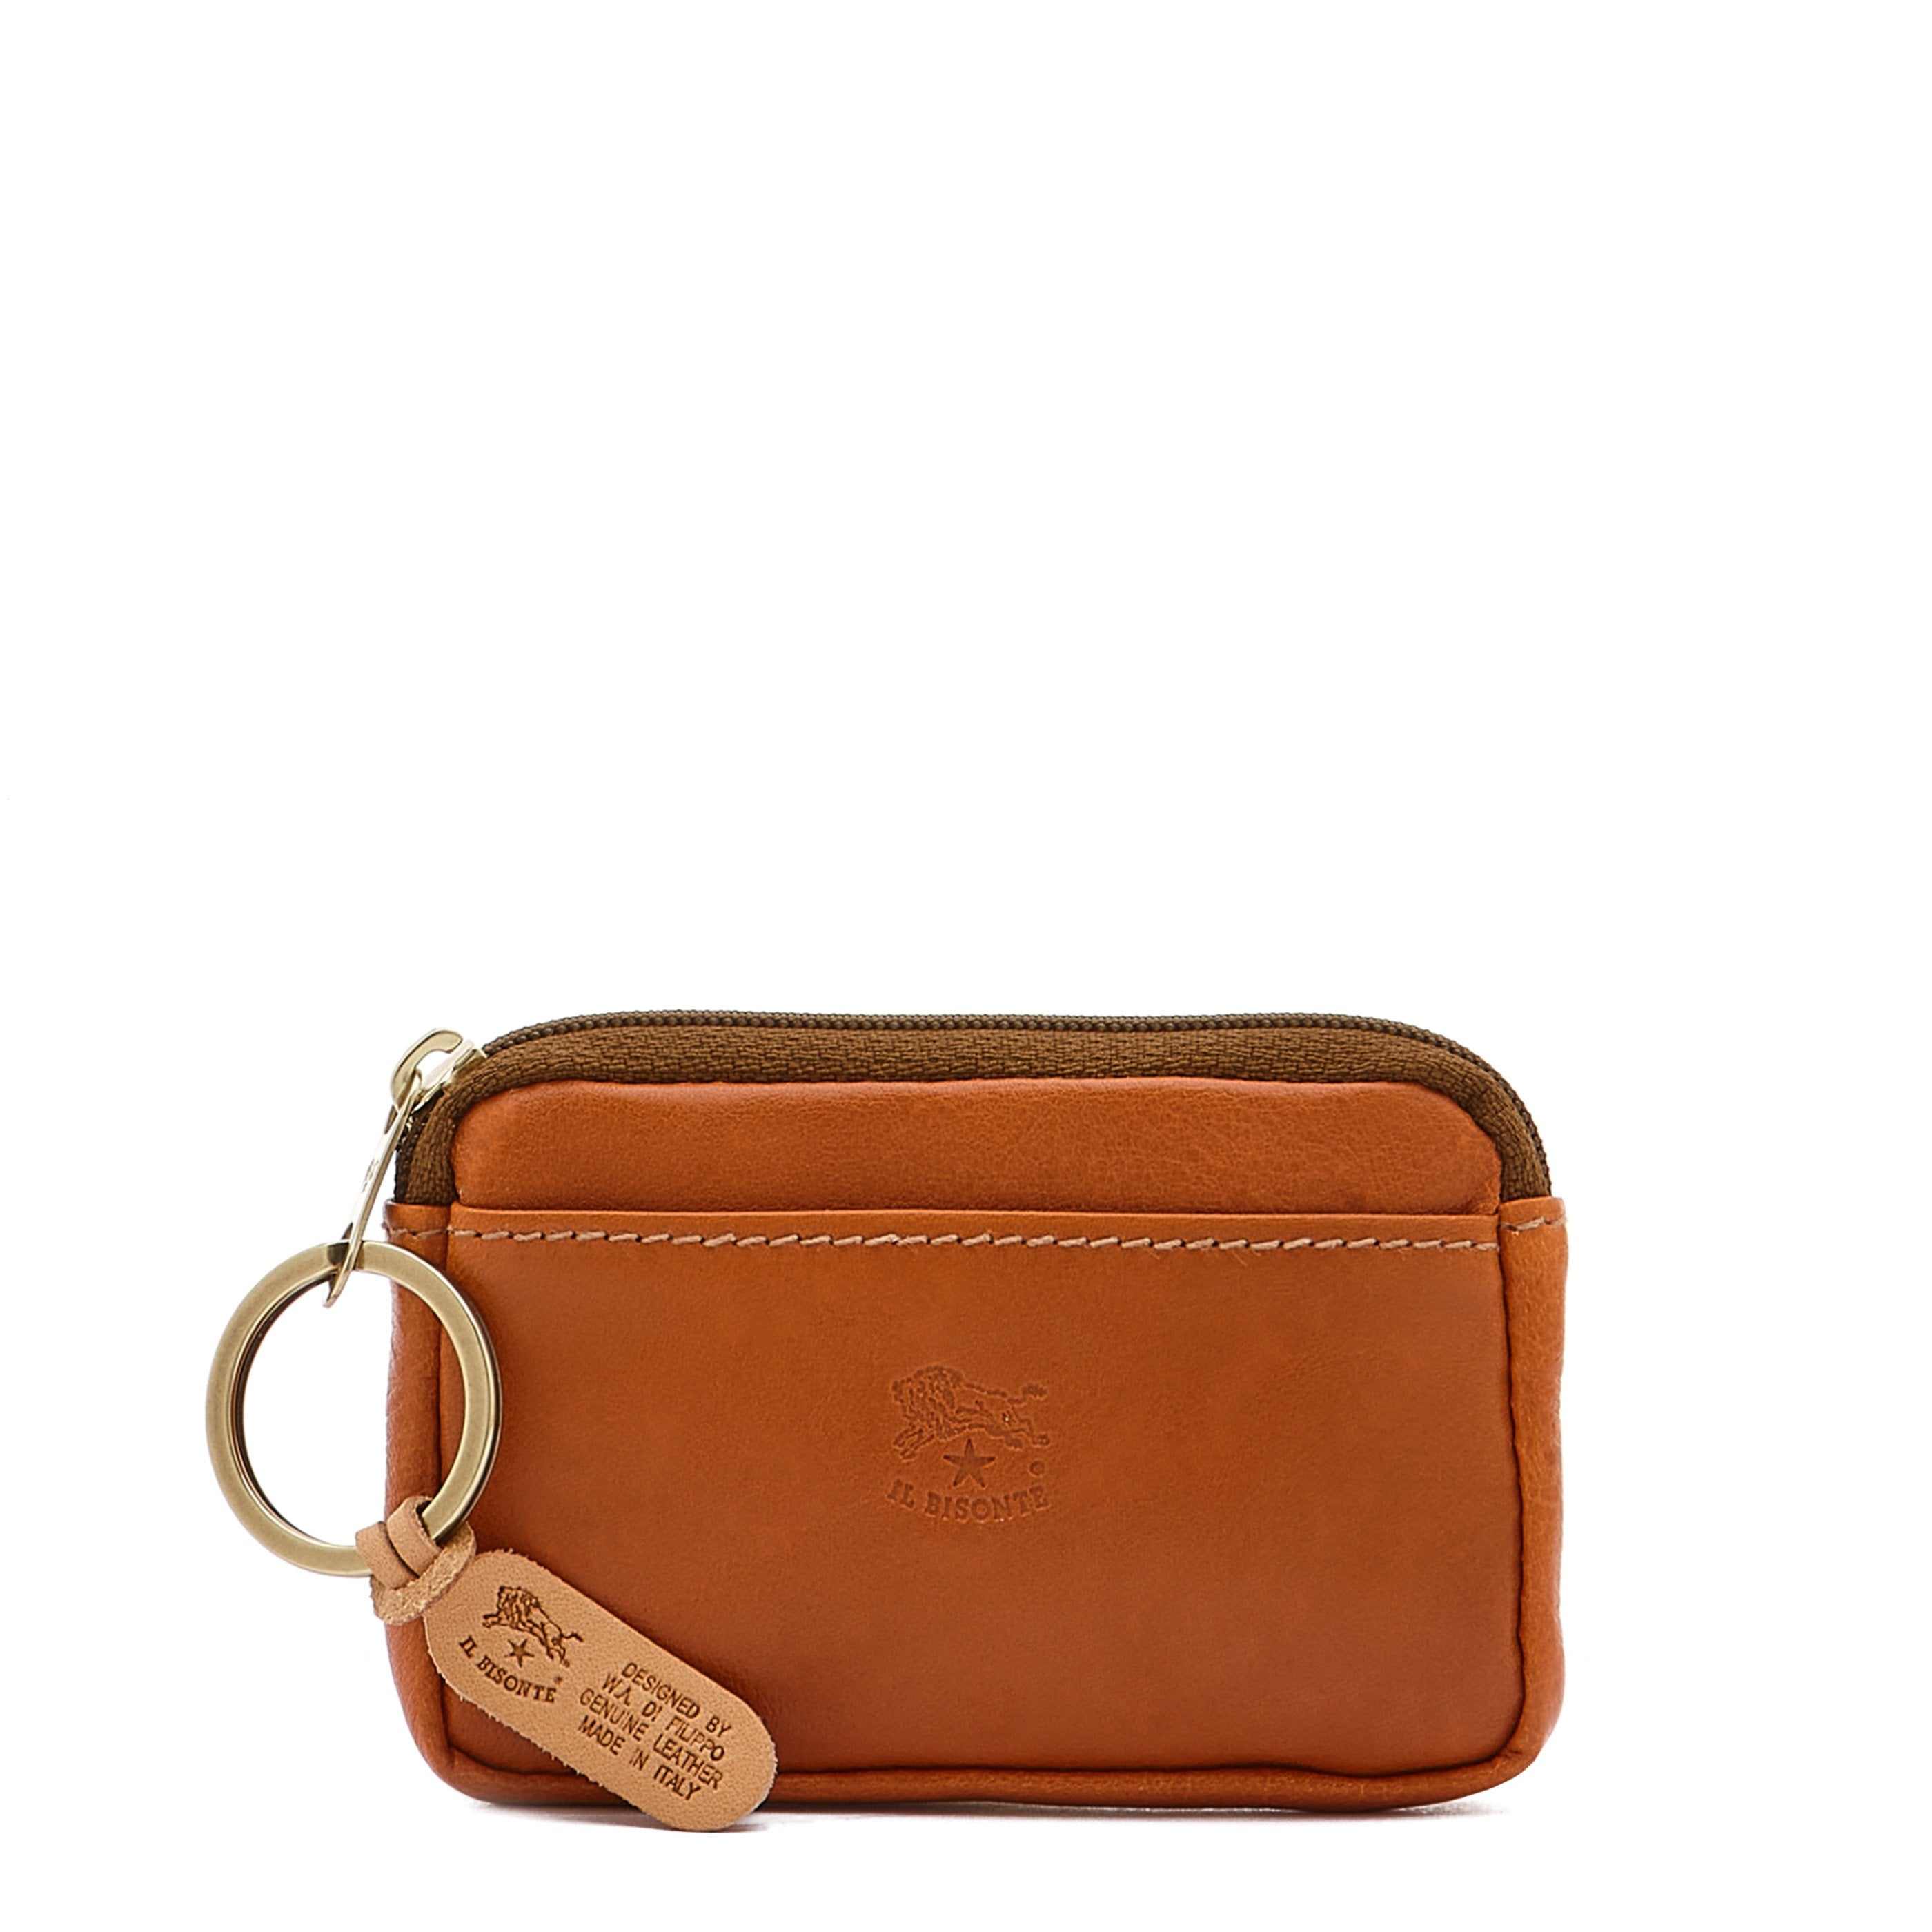 Coin purse in calf leather color caramel